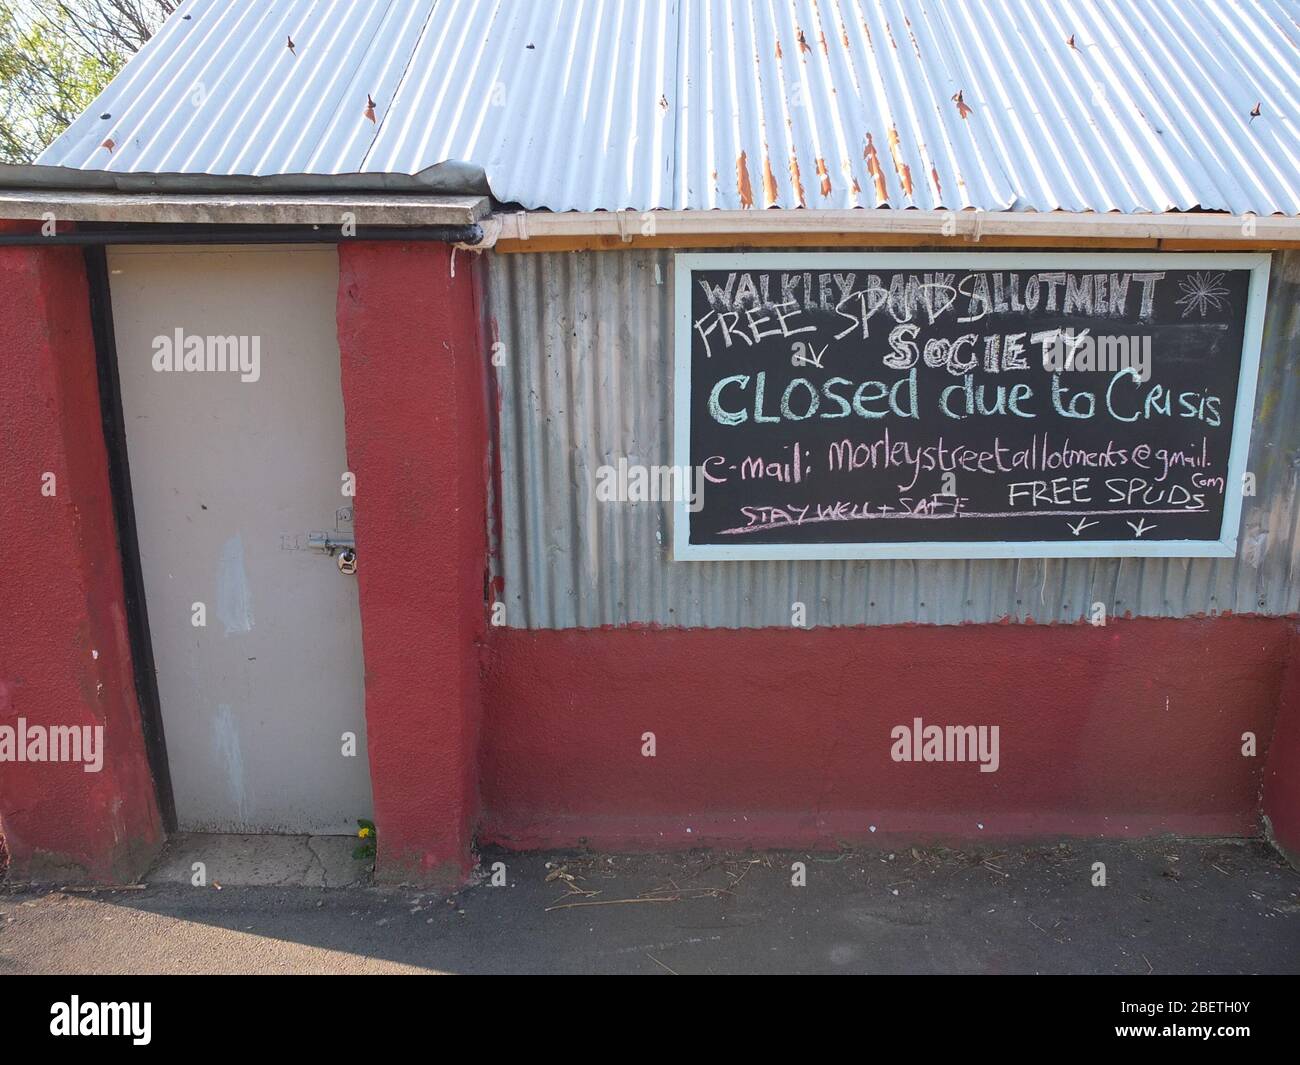 A sign on a blackboard outside Walkley Bank Allotment Society hut saying 'Closed due to CRISIS' [Coronavirus] and offering free spuds Stock Photo